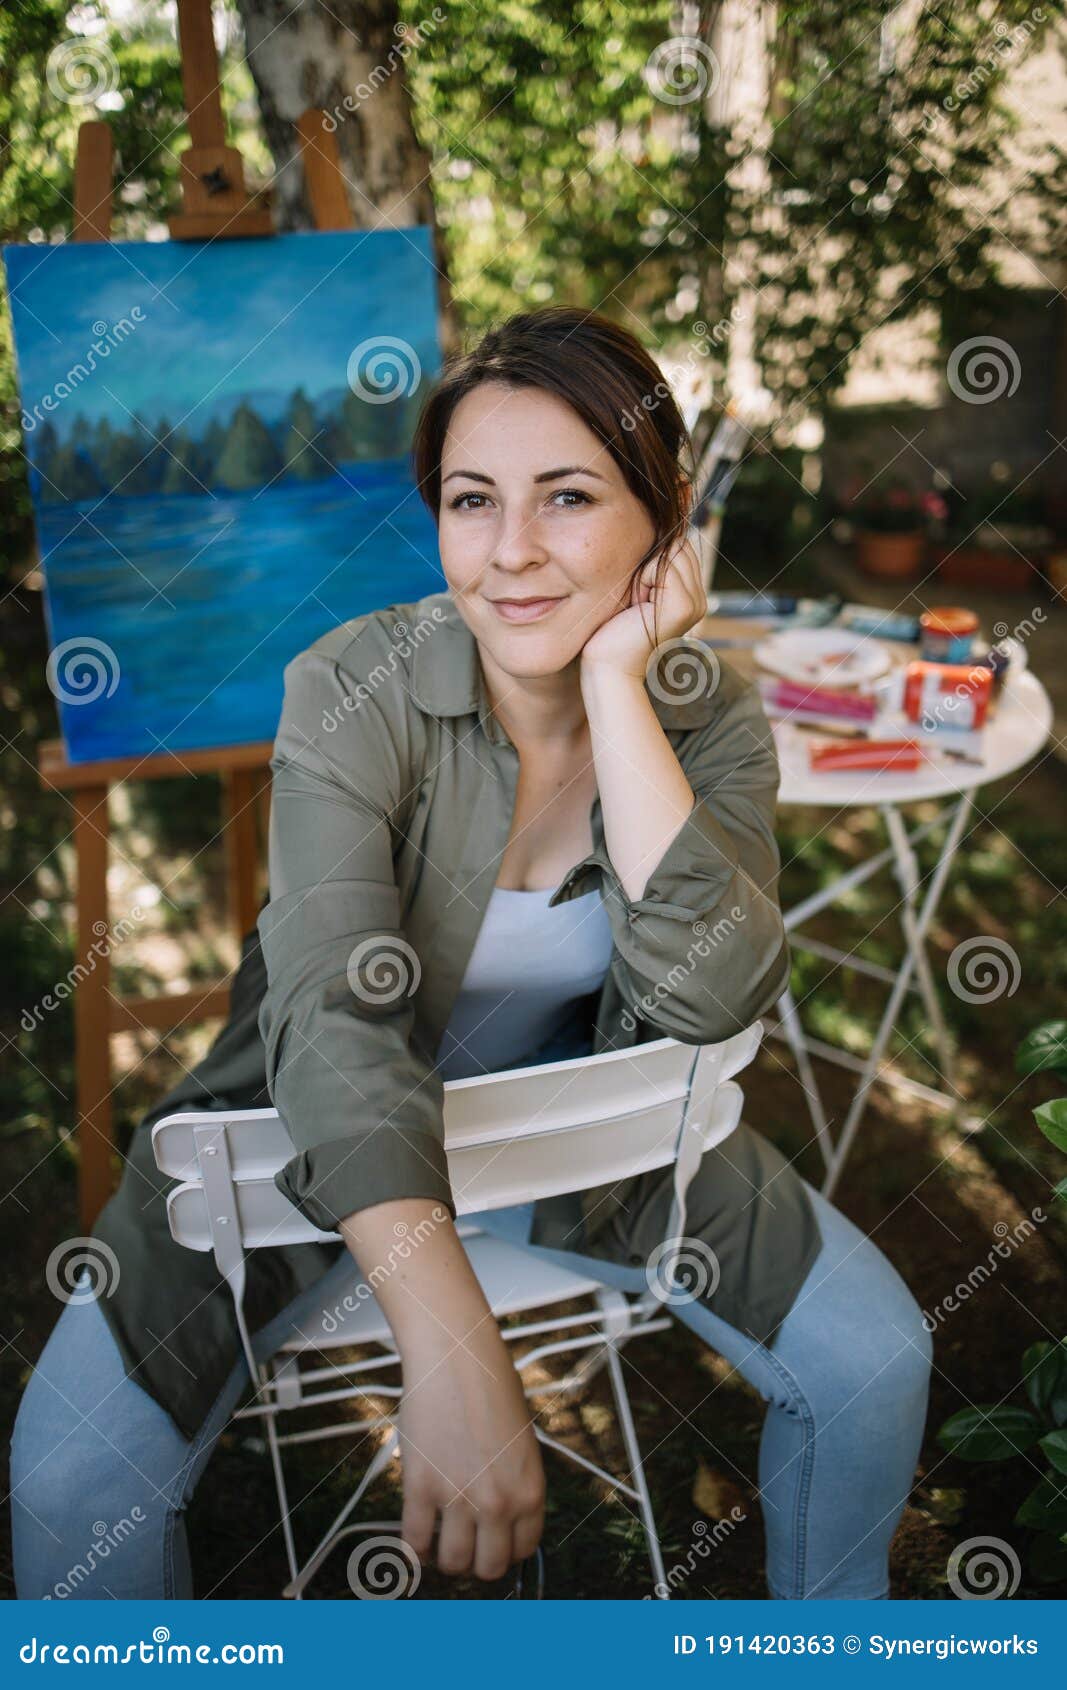 Lady Painter Sitting on Chair in Nature Stock Image - Image of color ...